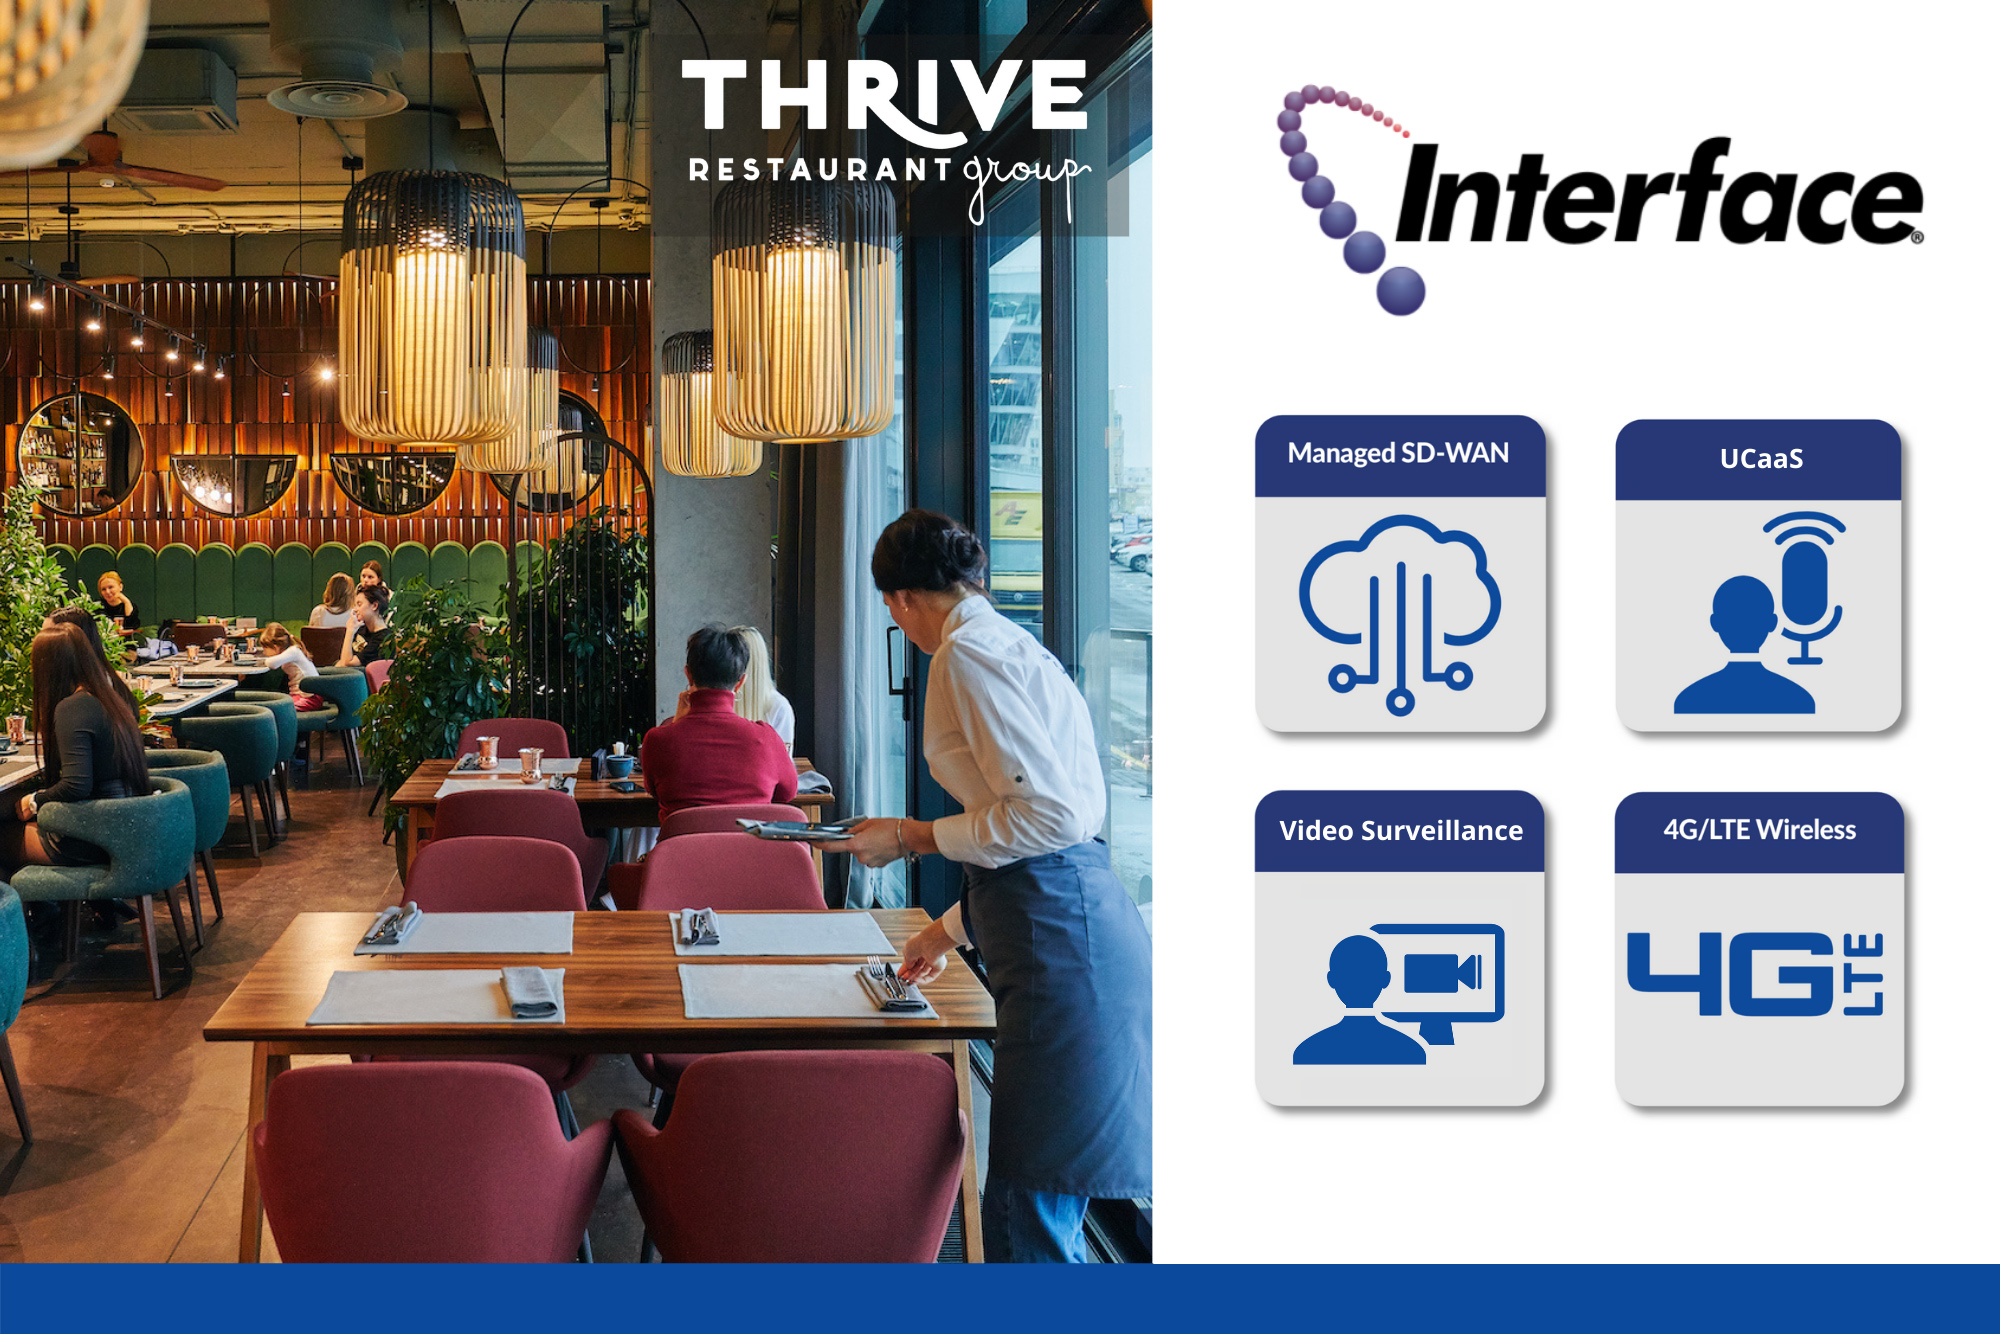 Interface Security Systems Helps Thrive Restaurant Group Implement New Managed SD-WAN, 4G/LTE, UCaaS and Security Systems